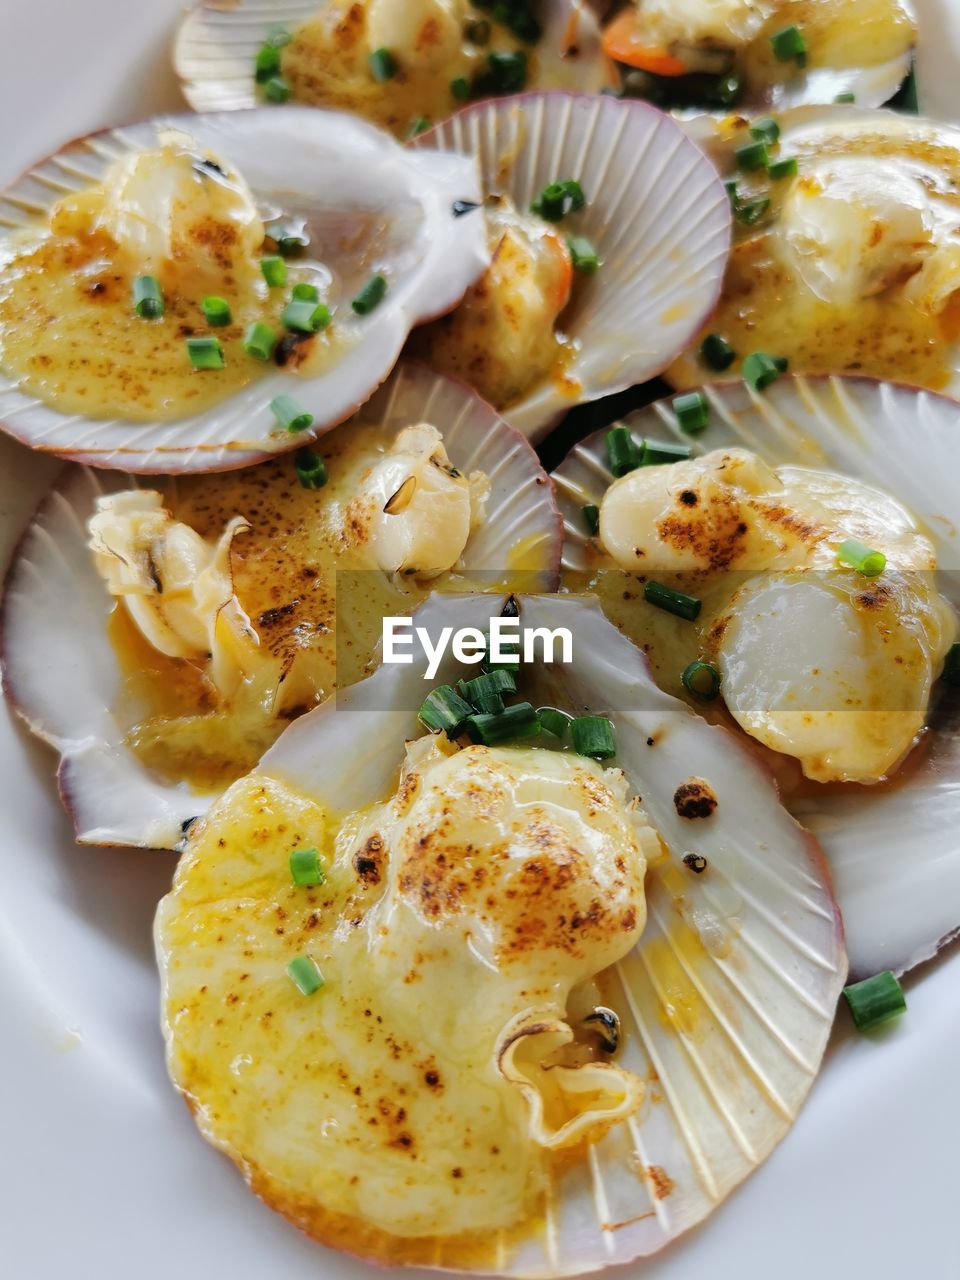 food, food and drink, healthy eating, seafood, freshness, dish, plate, vegetable, produce, herb, wellbeing, no people, cuisine, close-up, appetizer, meal, egg, scallop, animal, indoors, high angle view, plant